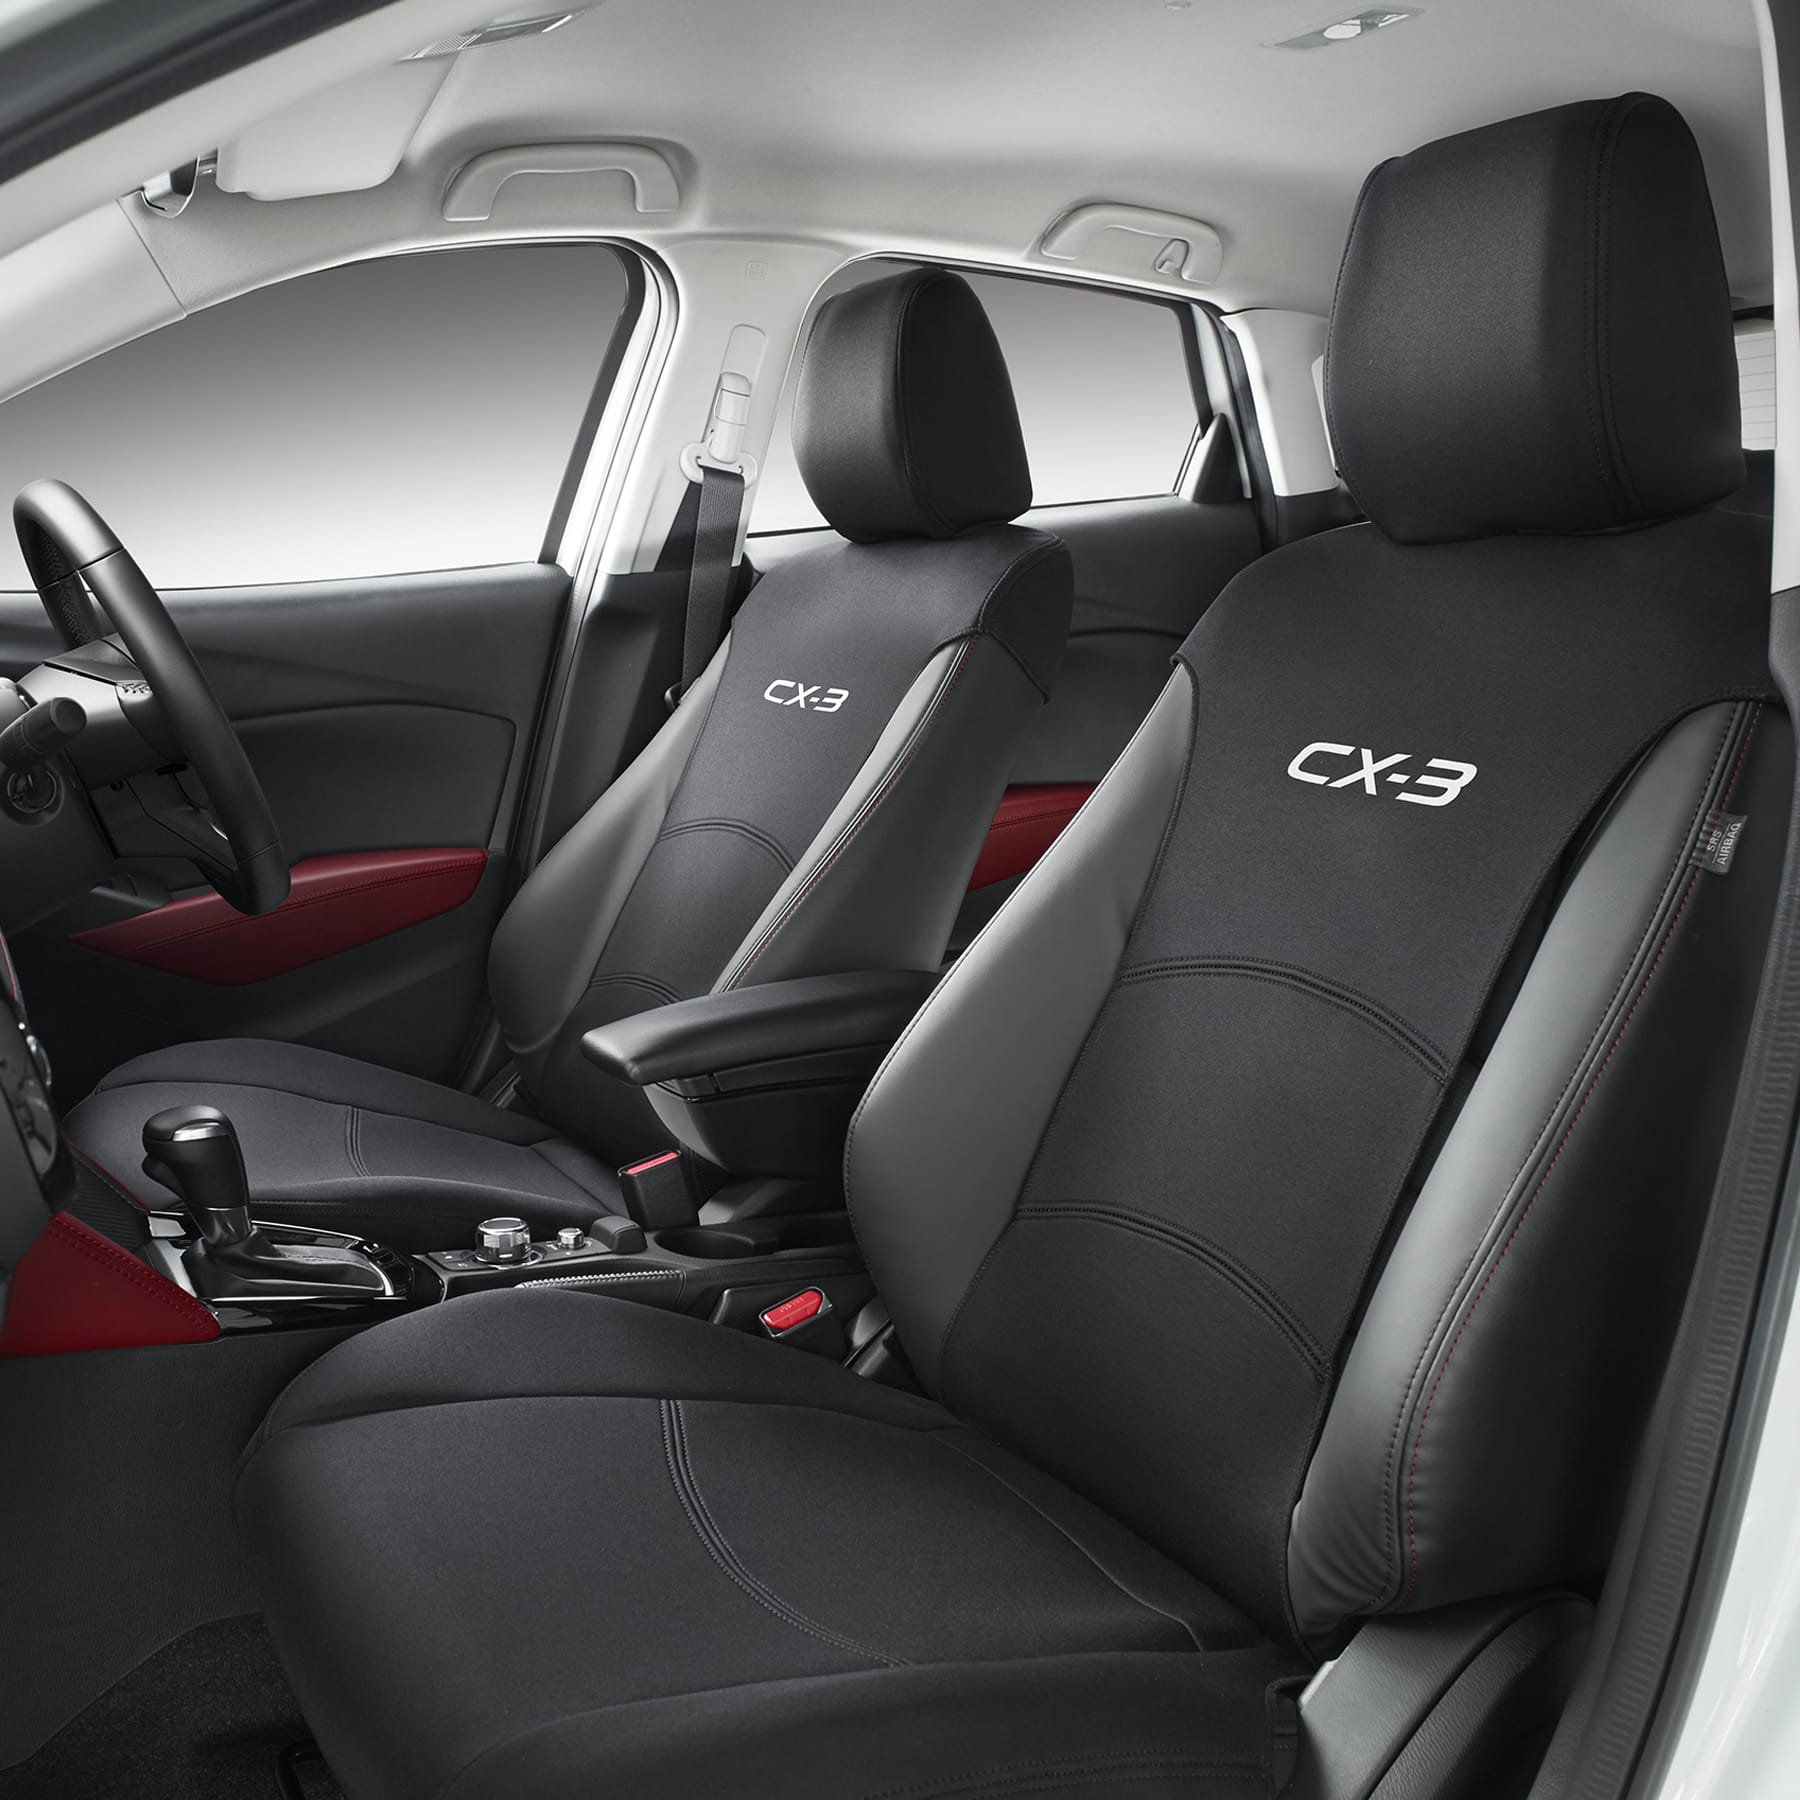 Seat Covers For Mazda 3 - Velcromag